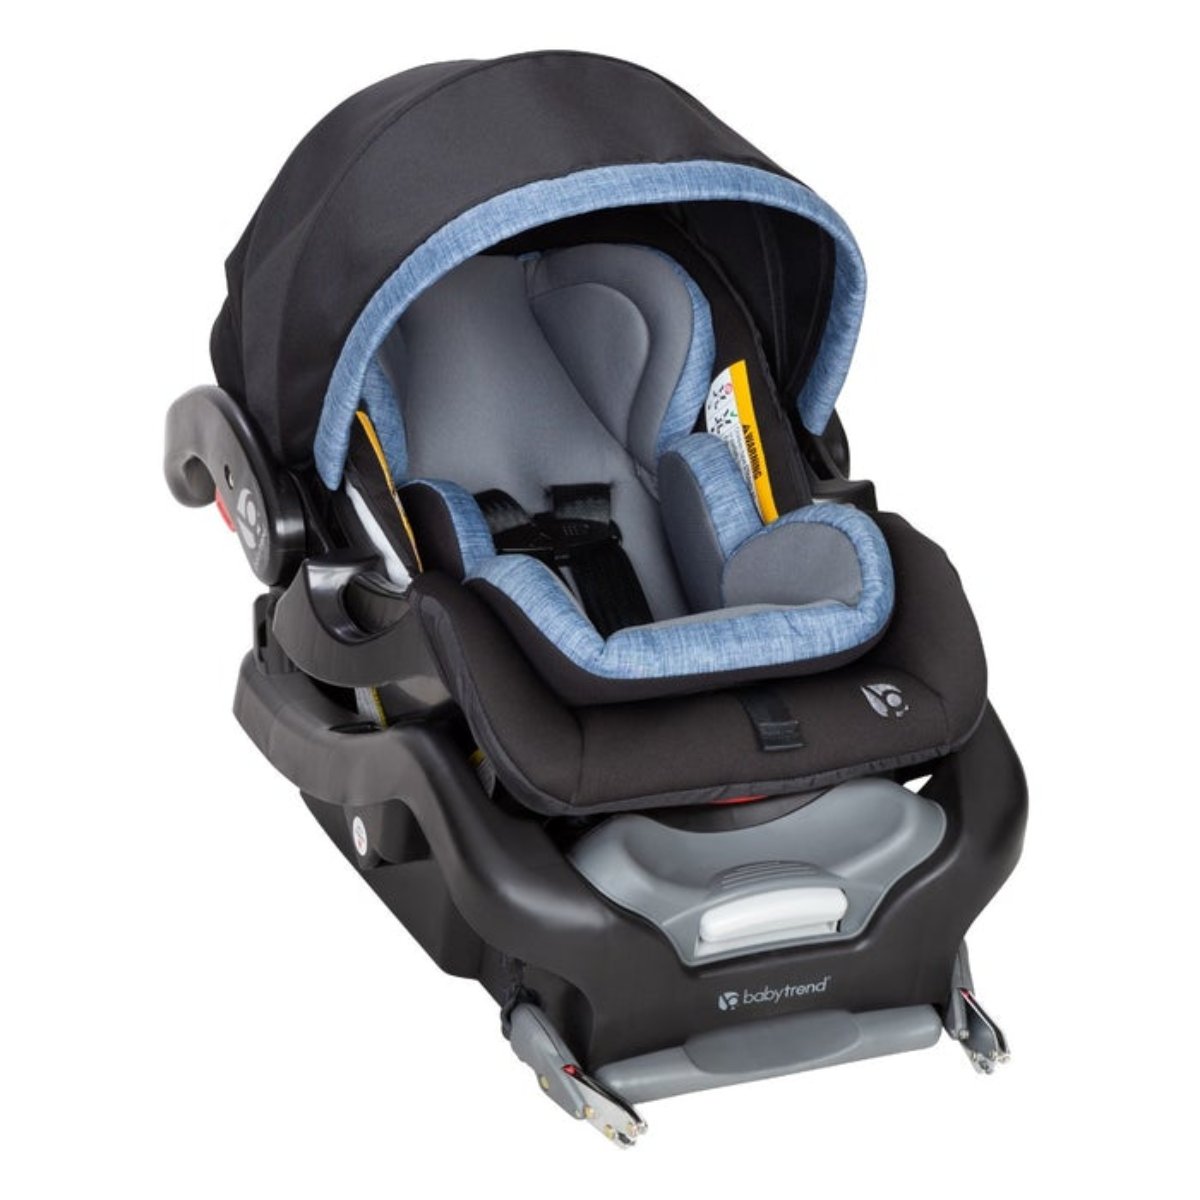 SECURE SNAP TECH 35 INFANT CAR SEAT-CHAMBRAY